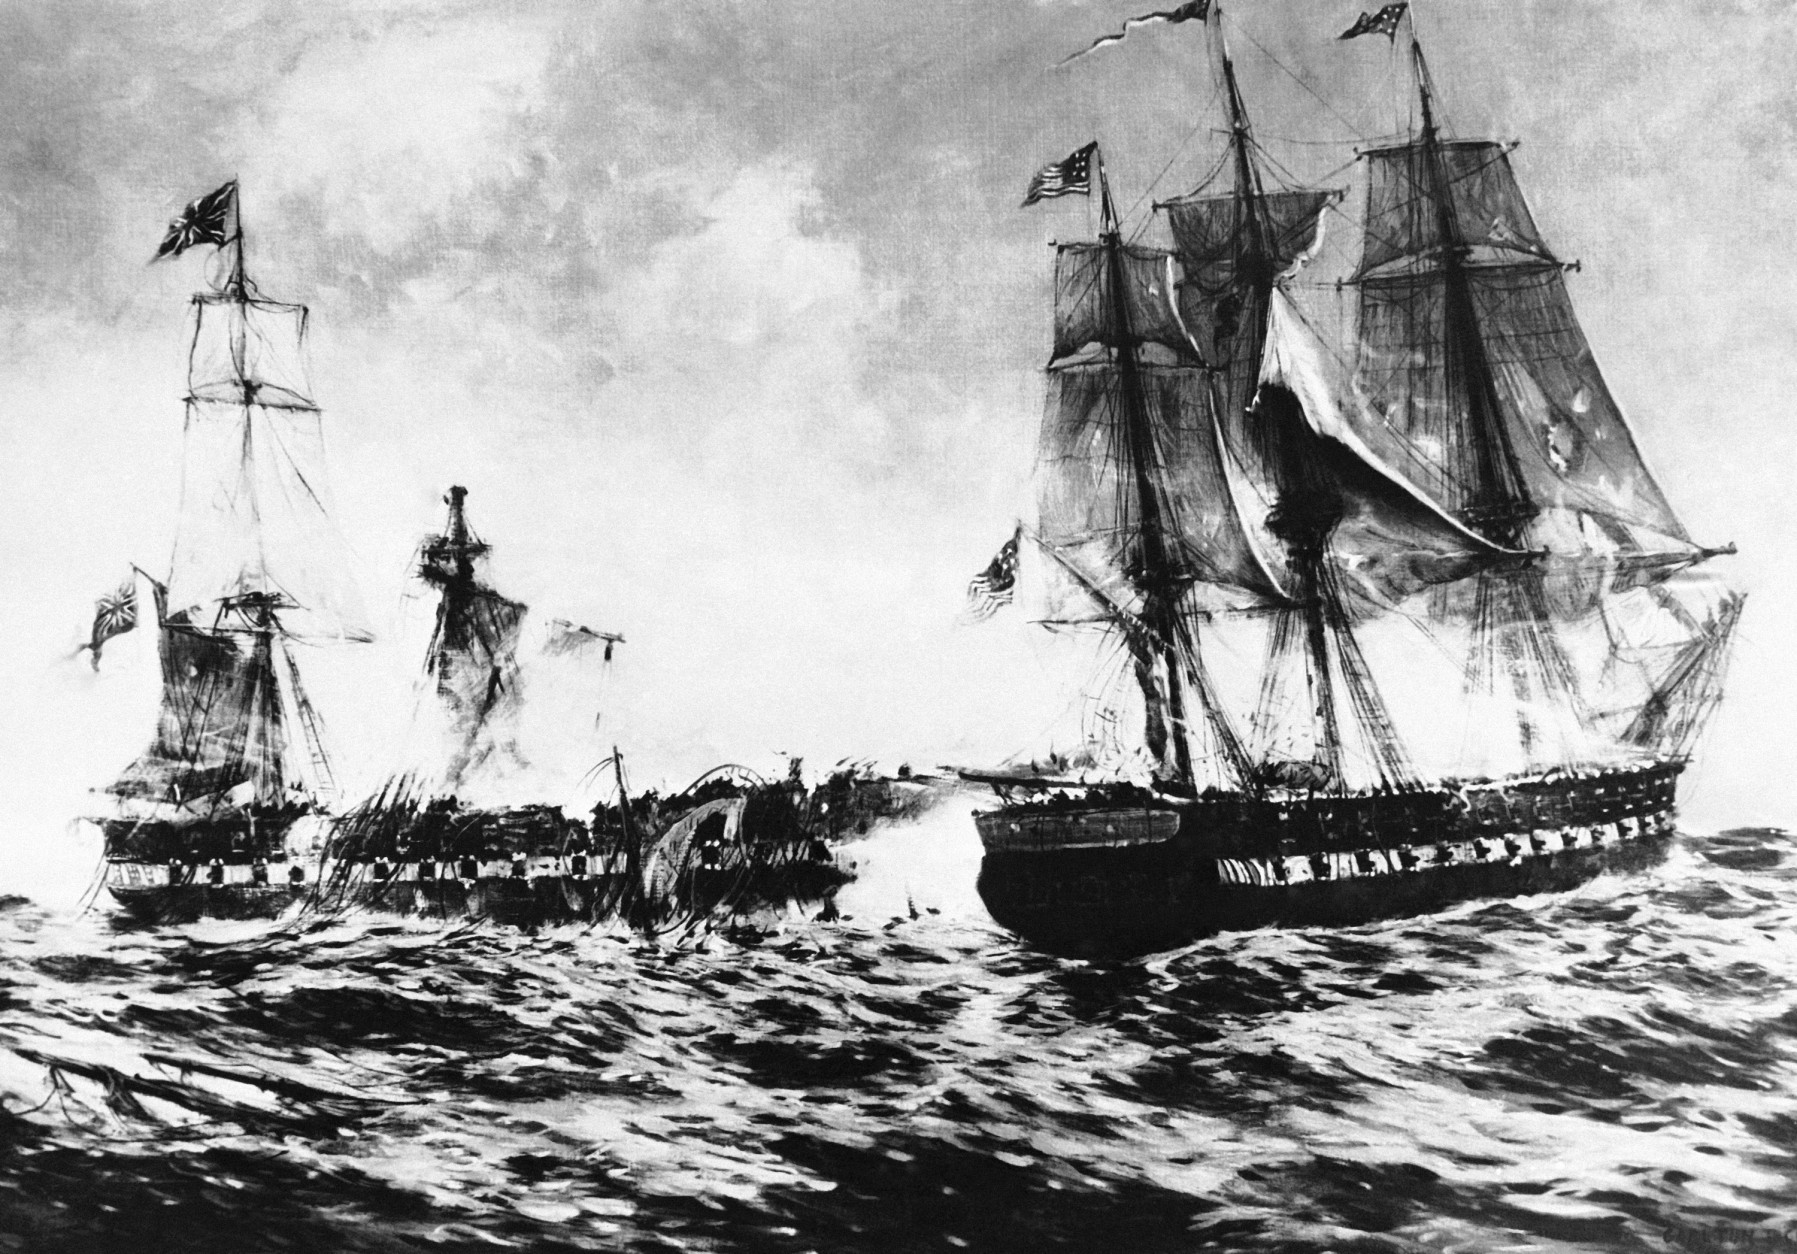 prior to the war of 1812, the british navy engaged in impressment, which meant that they